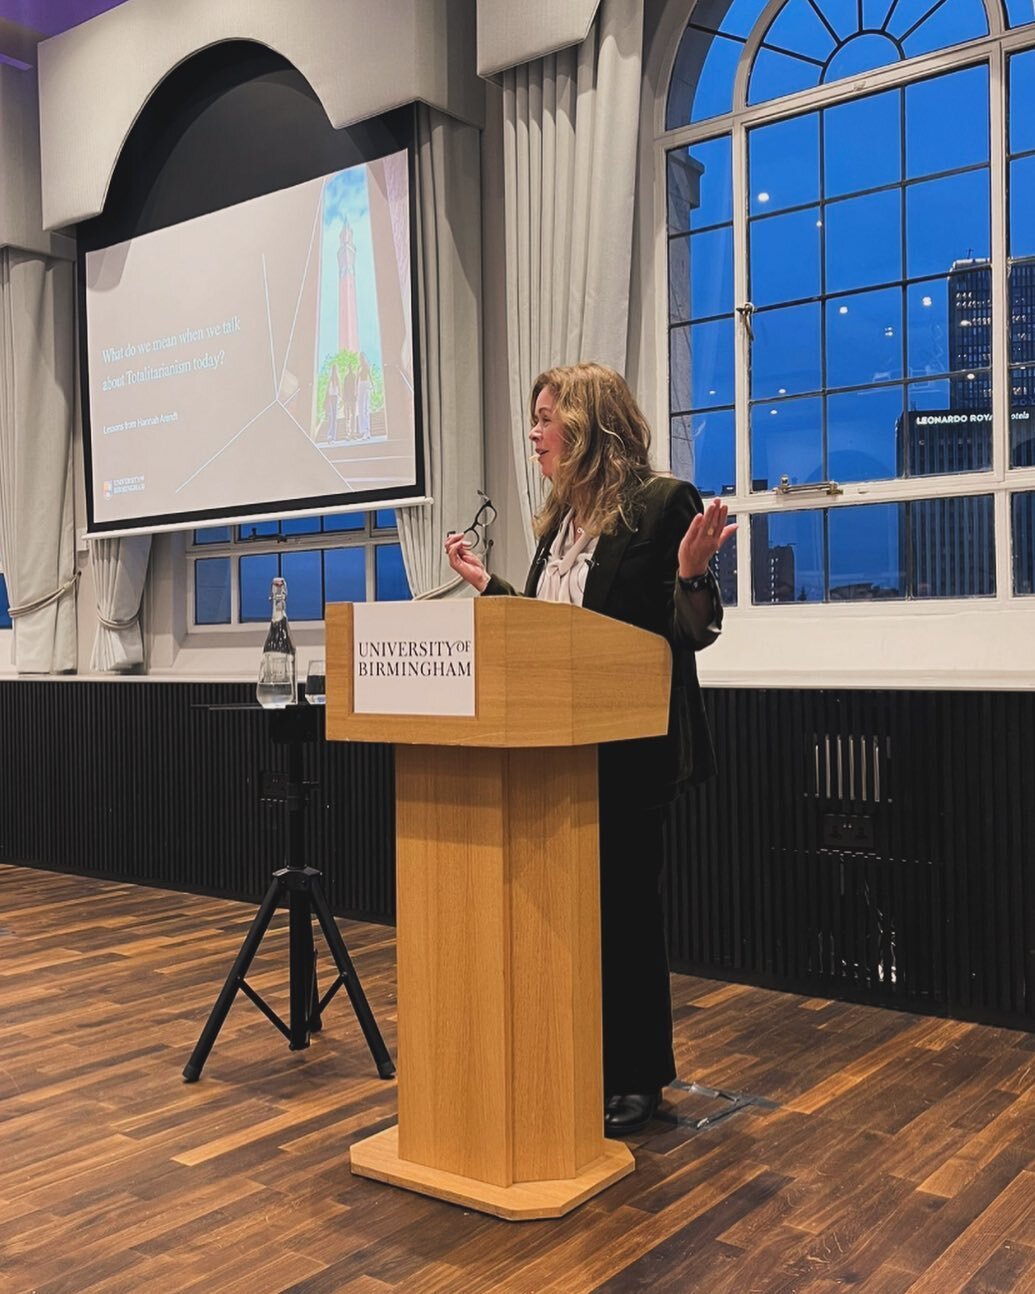 Six years, one pandemic, two books, one accident &amp; 4 teeth later: I finally got to give my inaugural lecture at the University of Birmingham last night. With thanks to all attended &amp; my lovely colleagues.
&lsquo;What do we mean when we talk a